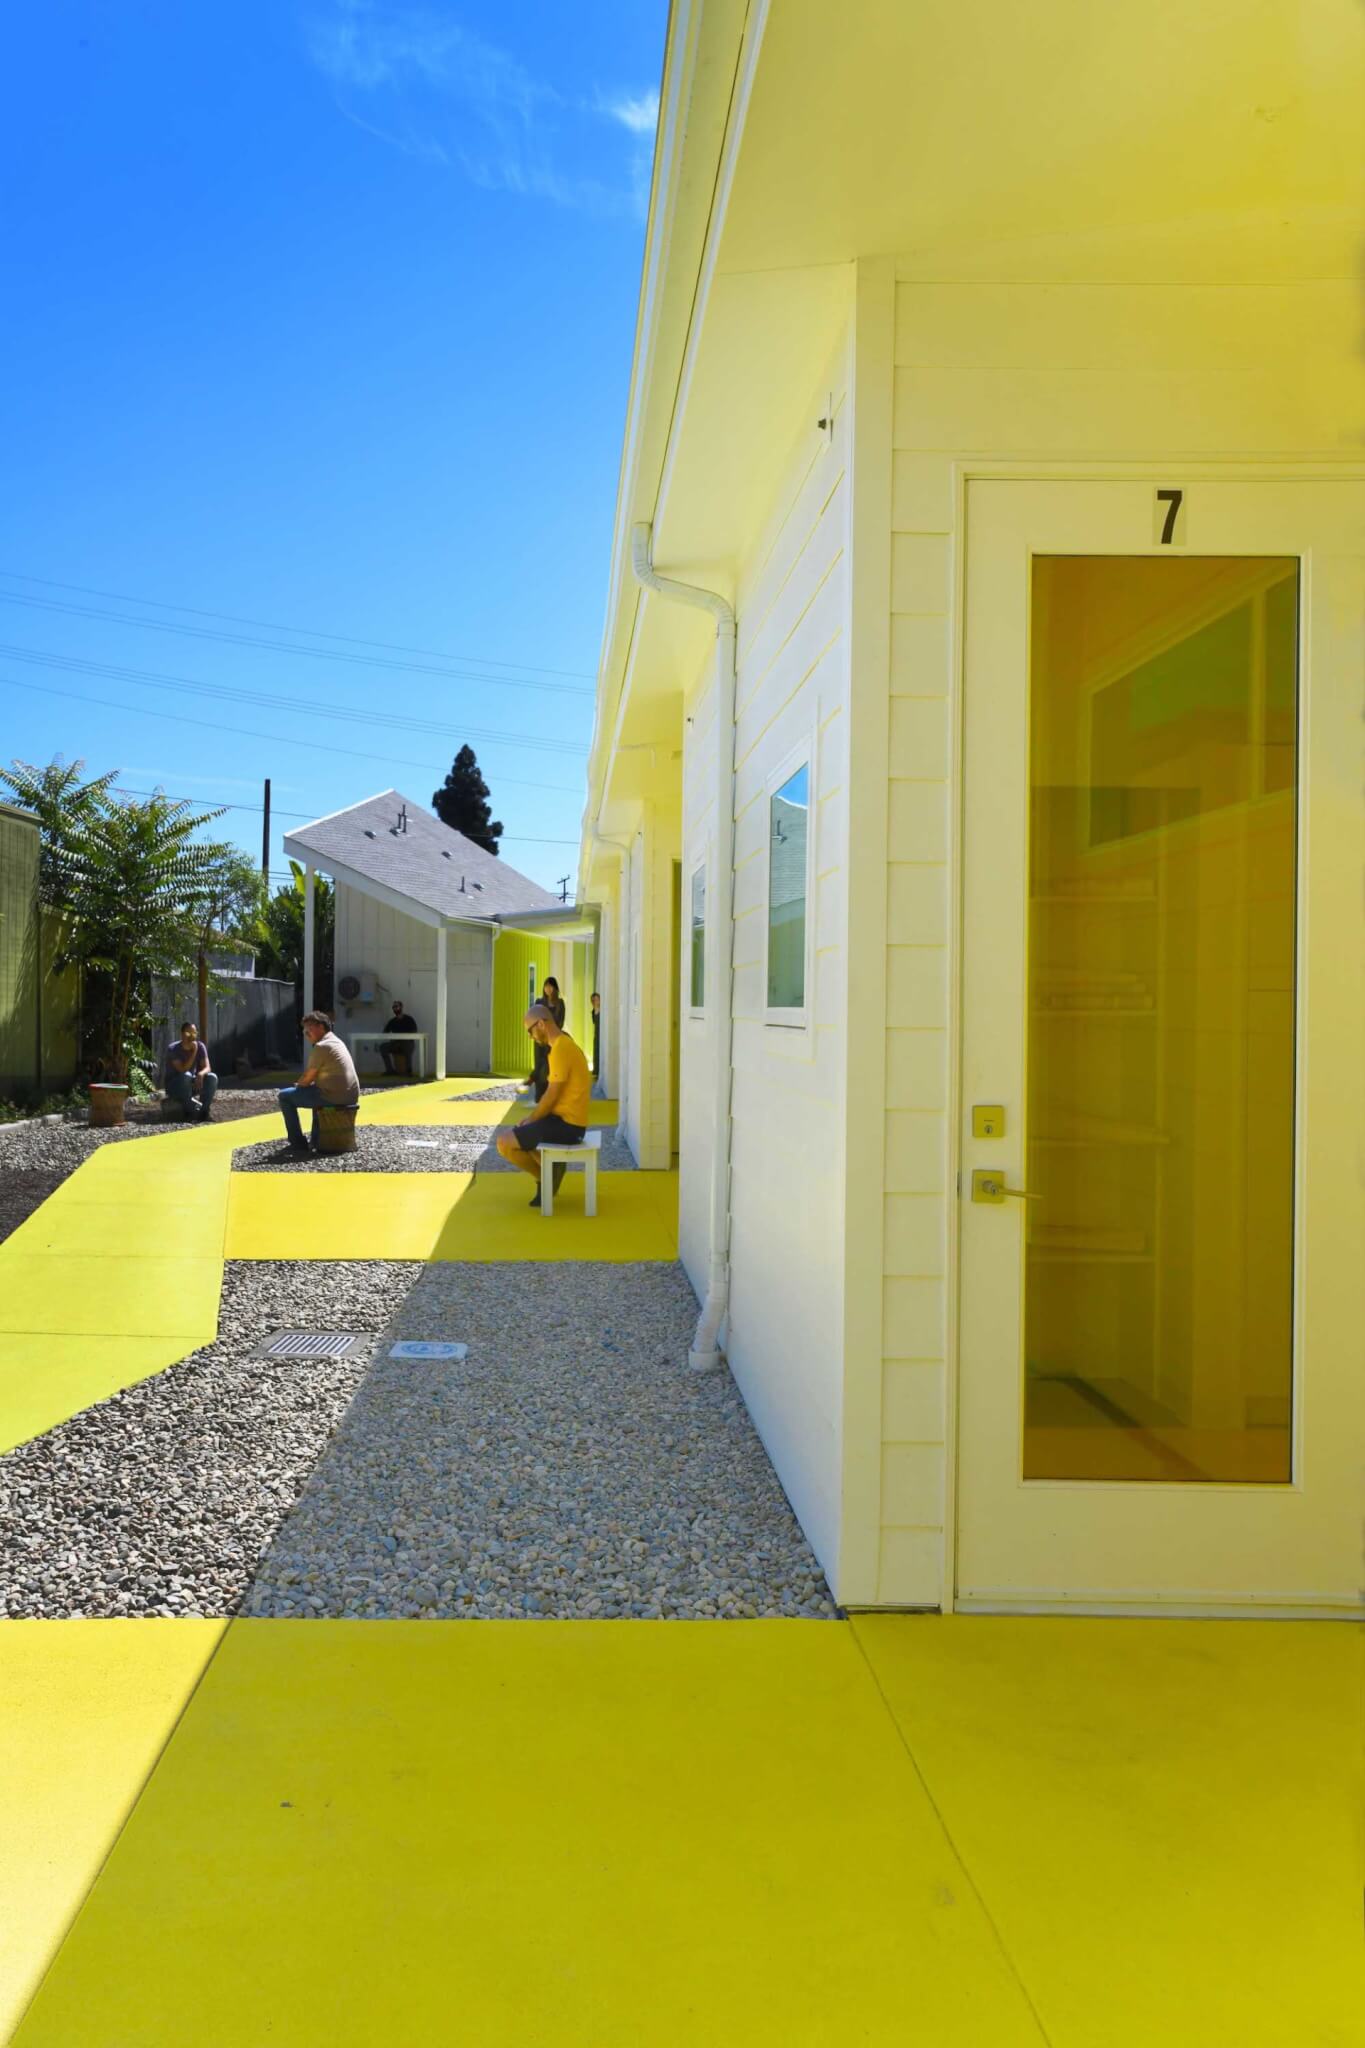 people sit outside housing units on yellow-painted communal spaces